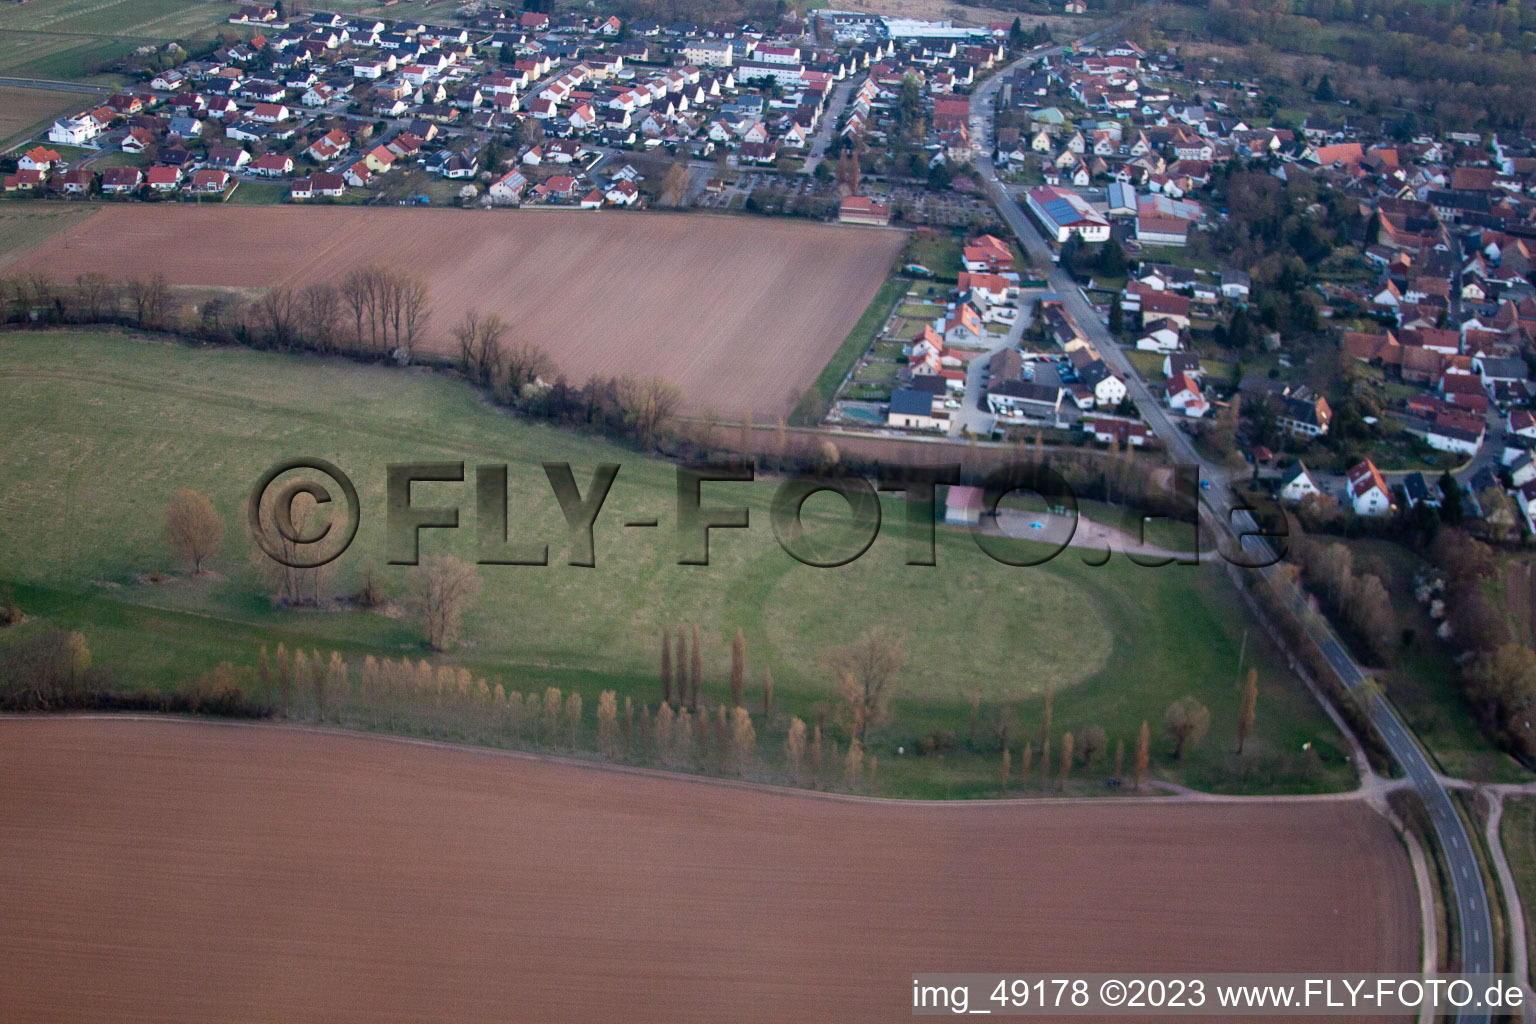 Aerial photograpy of Racetrack in the district Billigheim in Billigheim-Ingenheim in the state Rhineland-Palatinate, Germany